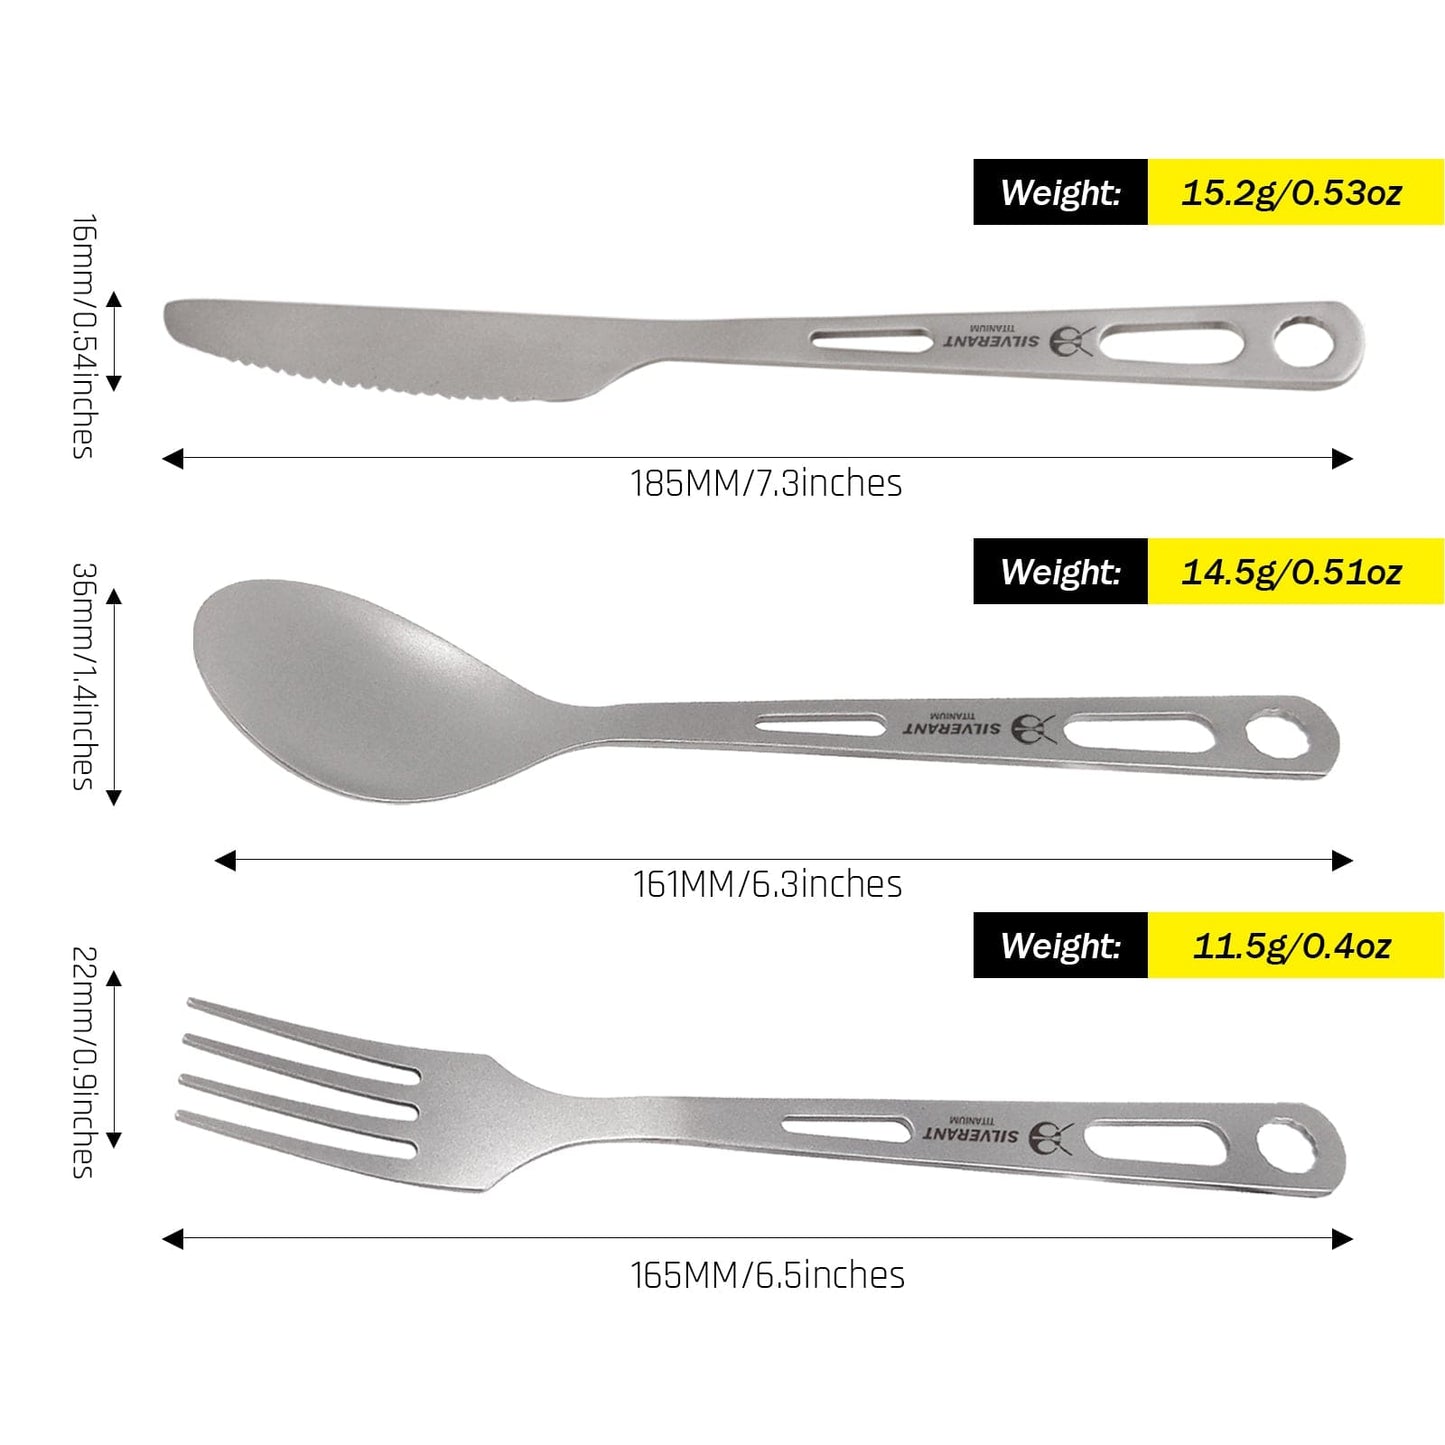 Titanium 3-Piece Cutlery Set (Knife, Fork and Spoon) - SilverAnt Outdoors